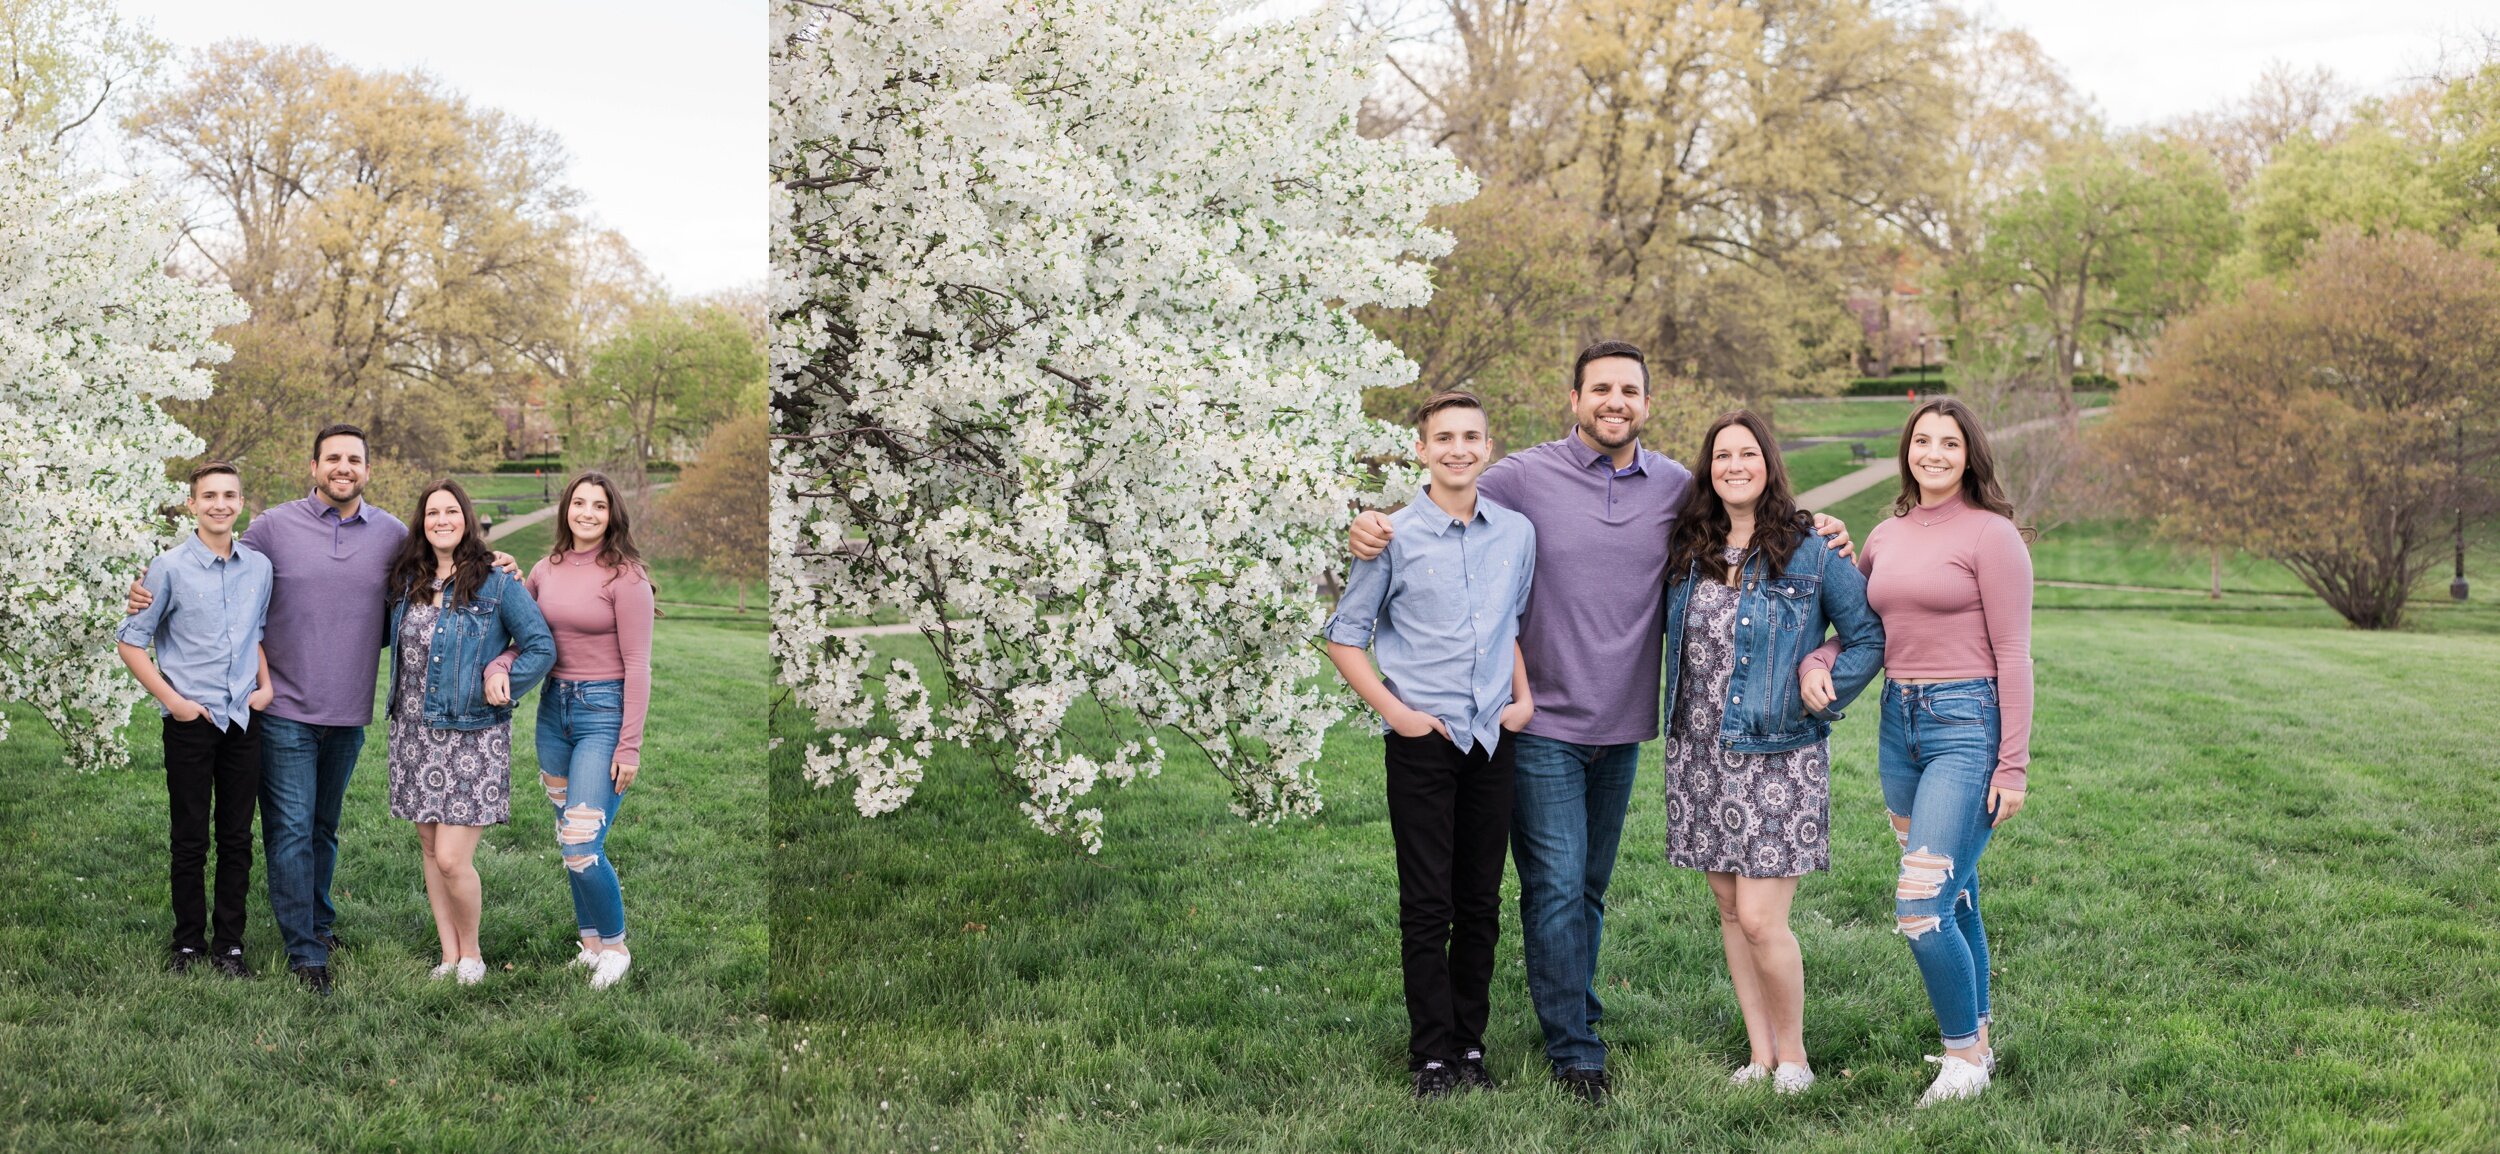 Spring Family Photography at Loose Park in Kansas City - 2